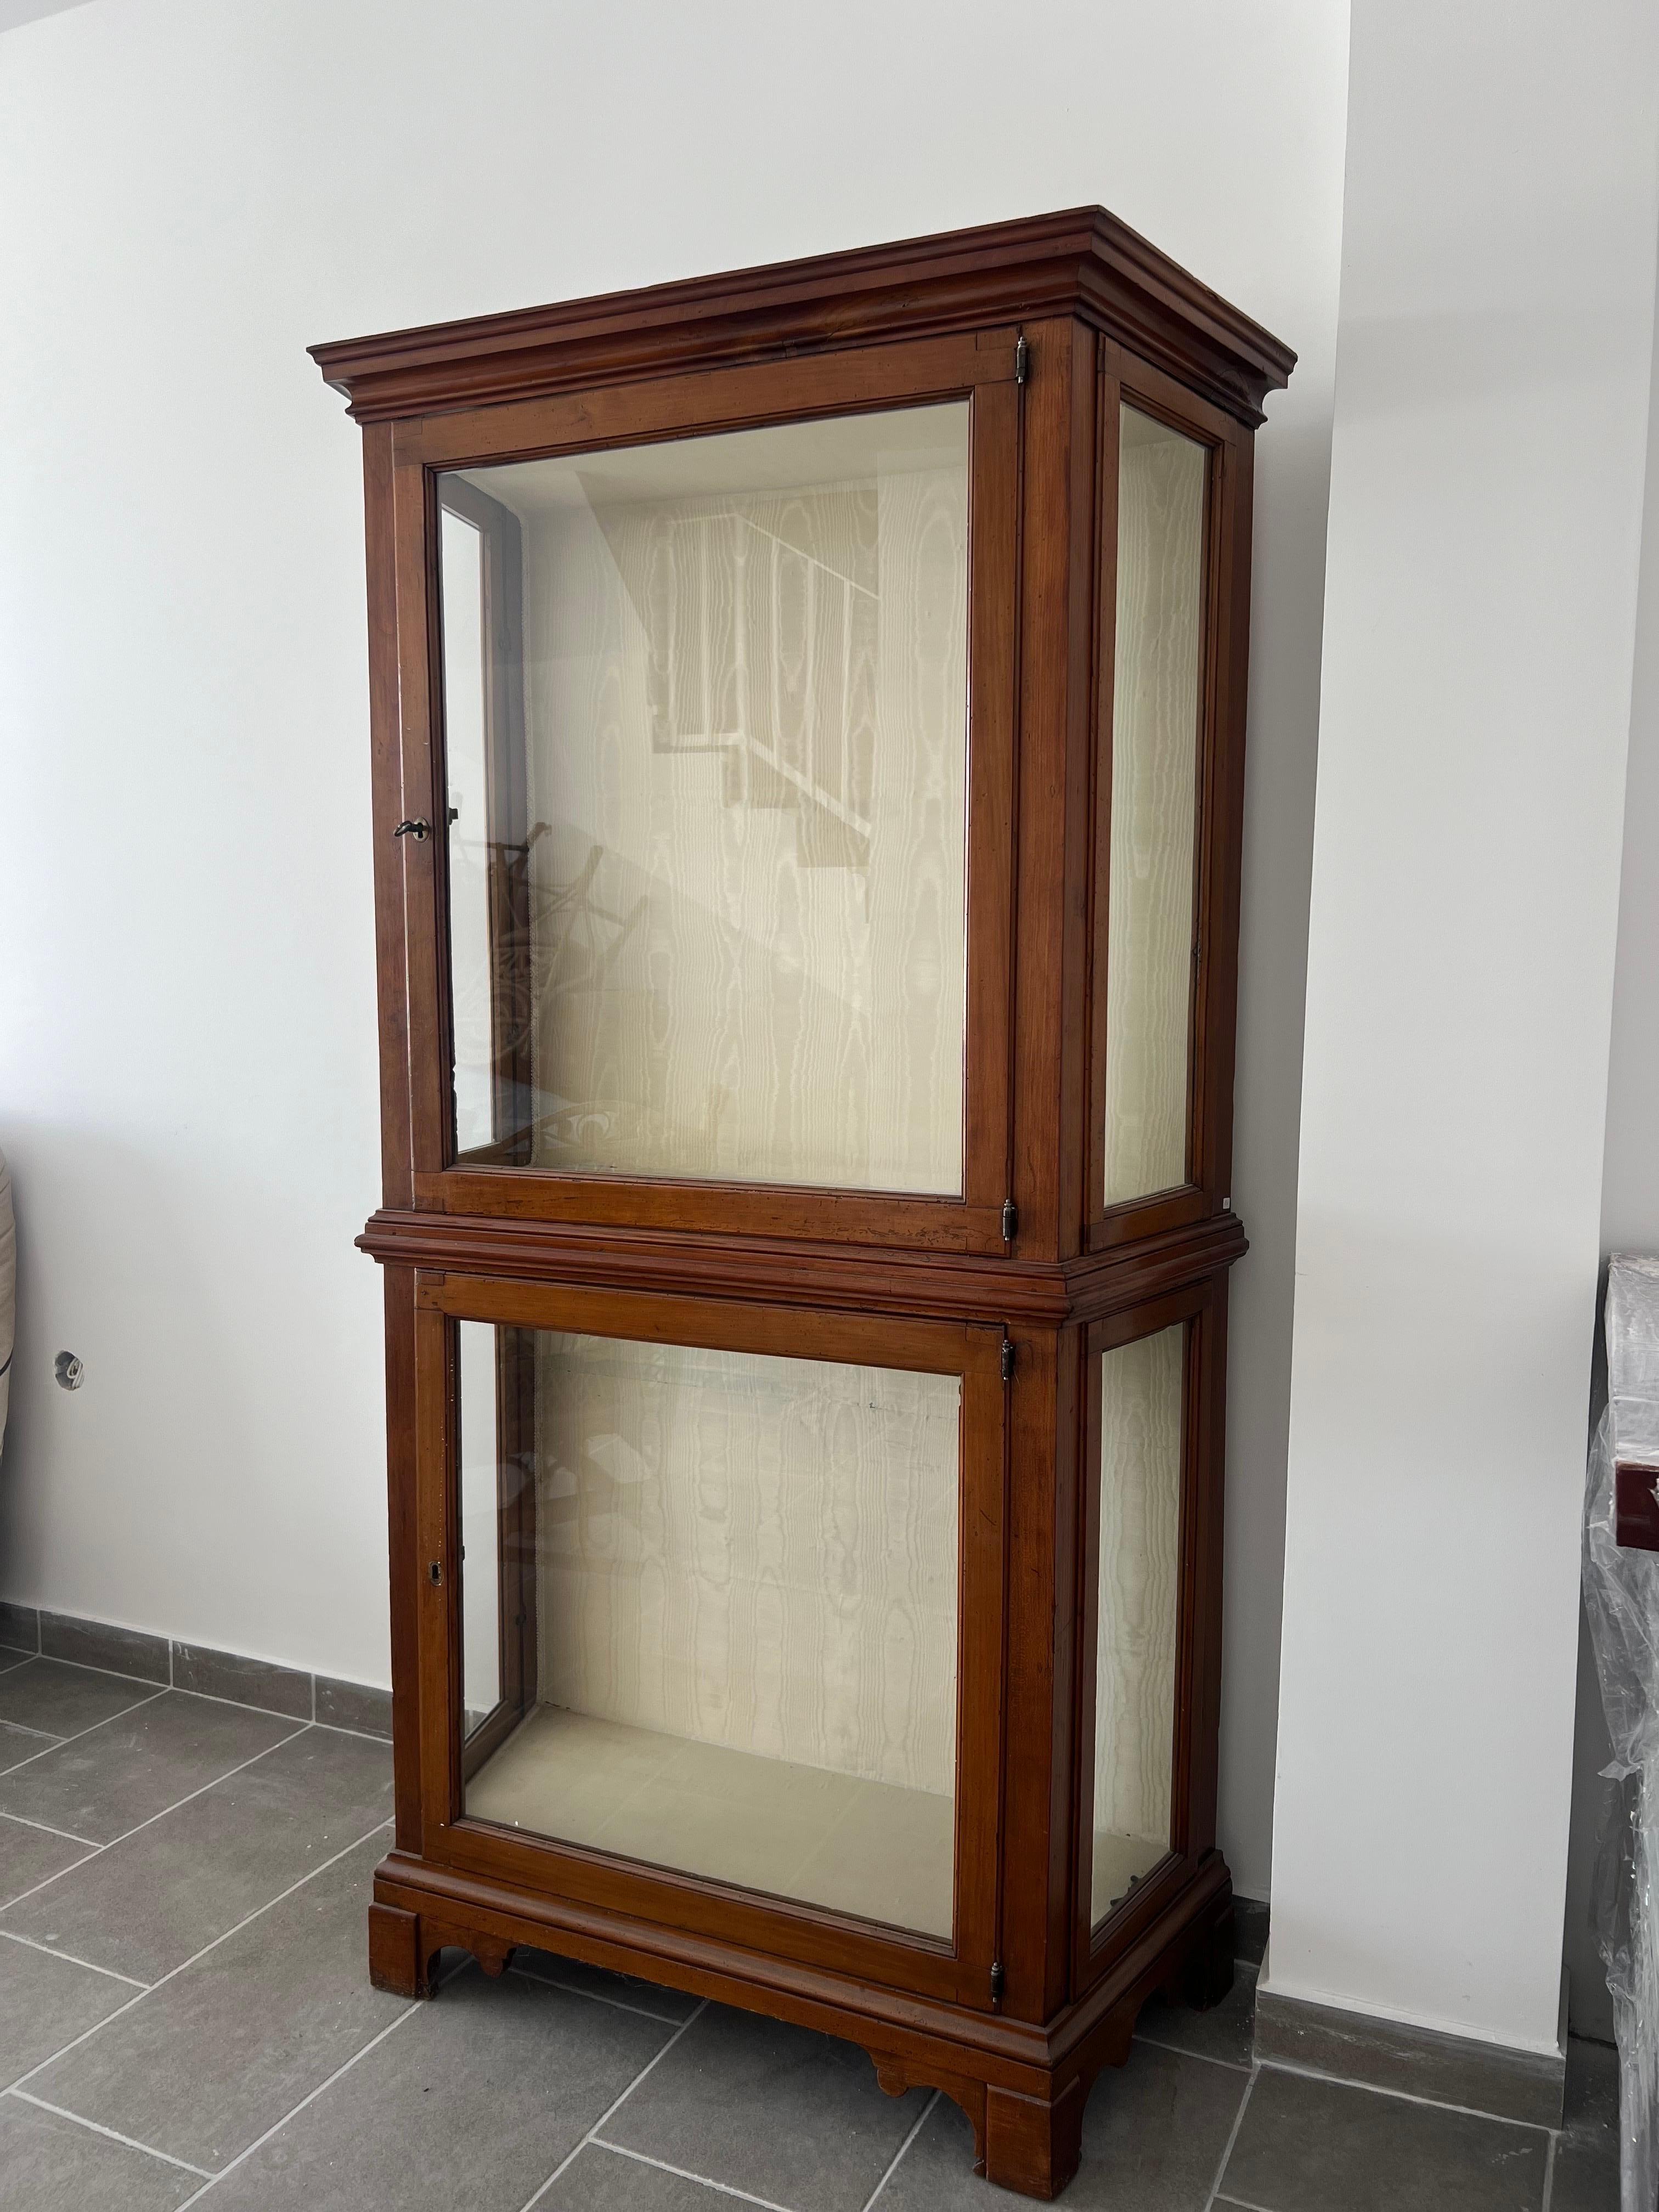 19th Century French hand carved wooden vitrine in Louis XV style. Very stable furniture with original glass doors and shelves in very authentic condition.
